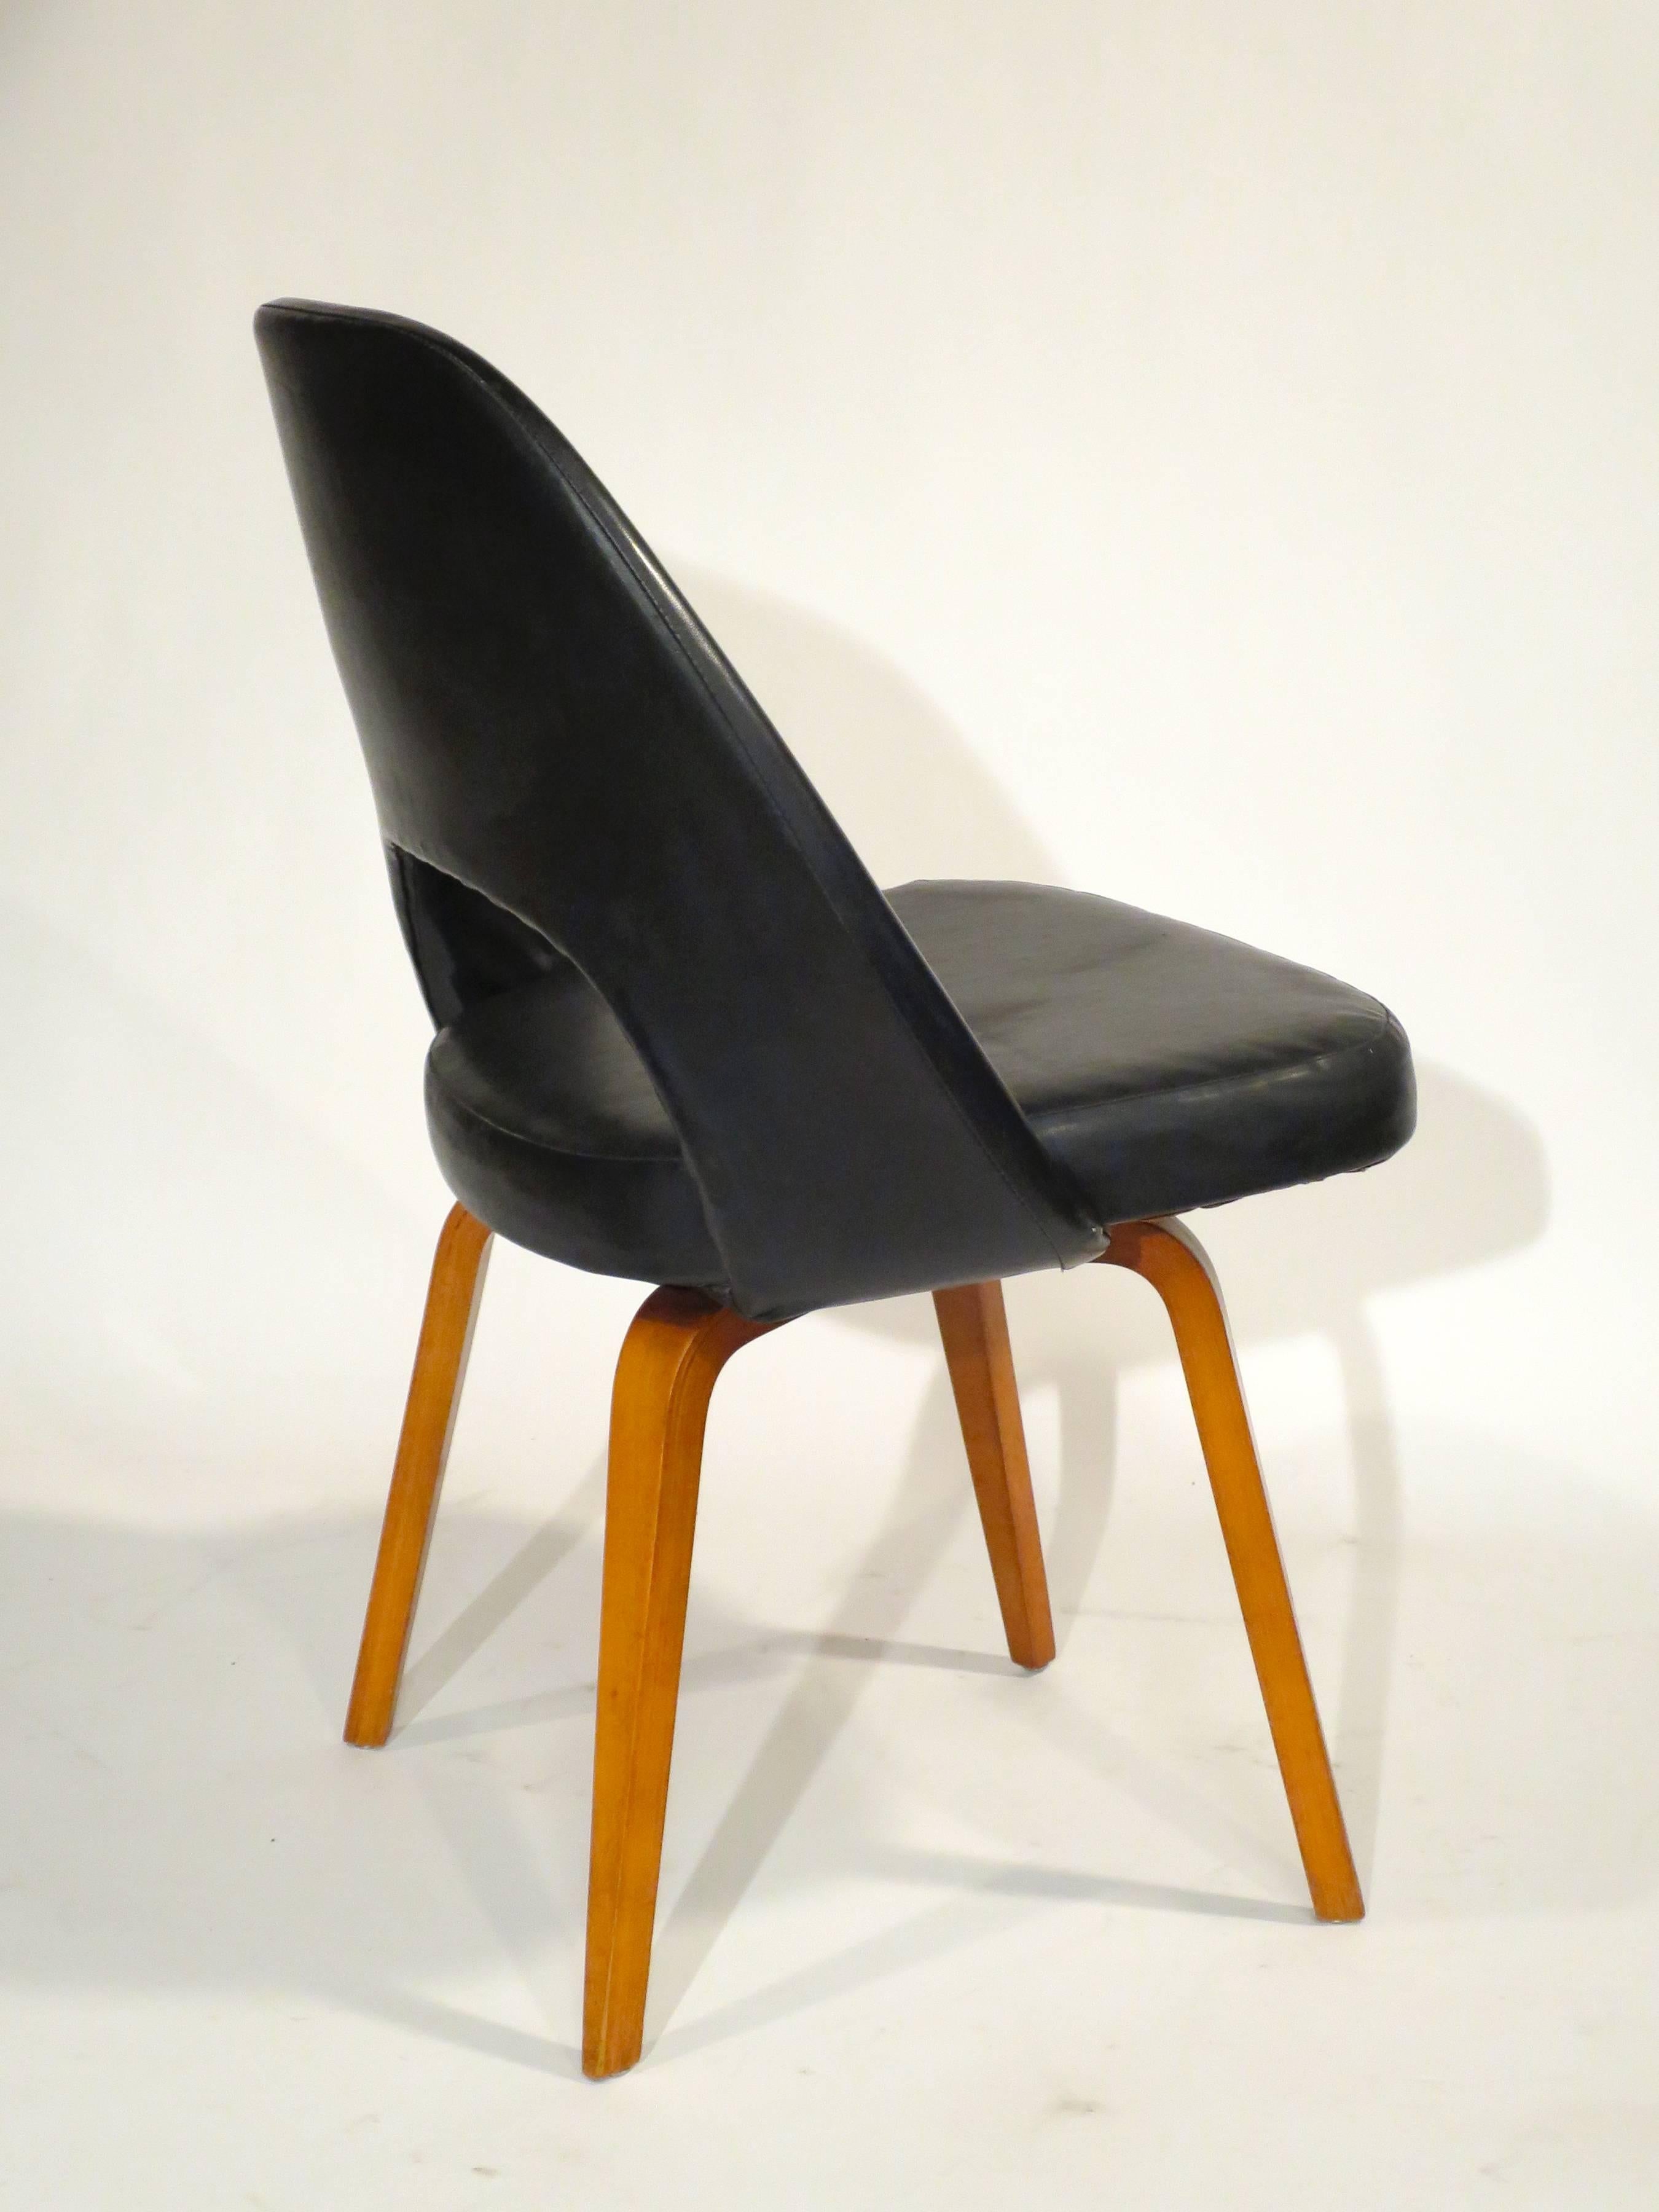 Early Eero Saarinen side chair with wooden legs. Manufactured by Knoll, circa 1950s. 

Complimentary U.S. shipping.